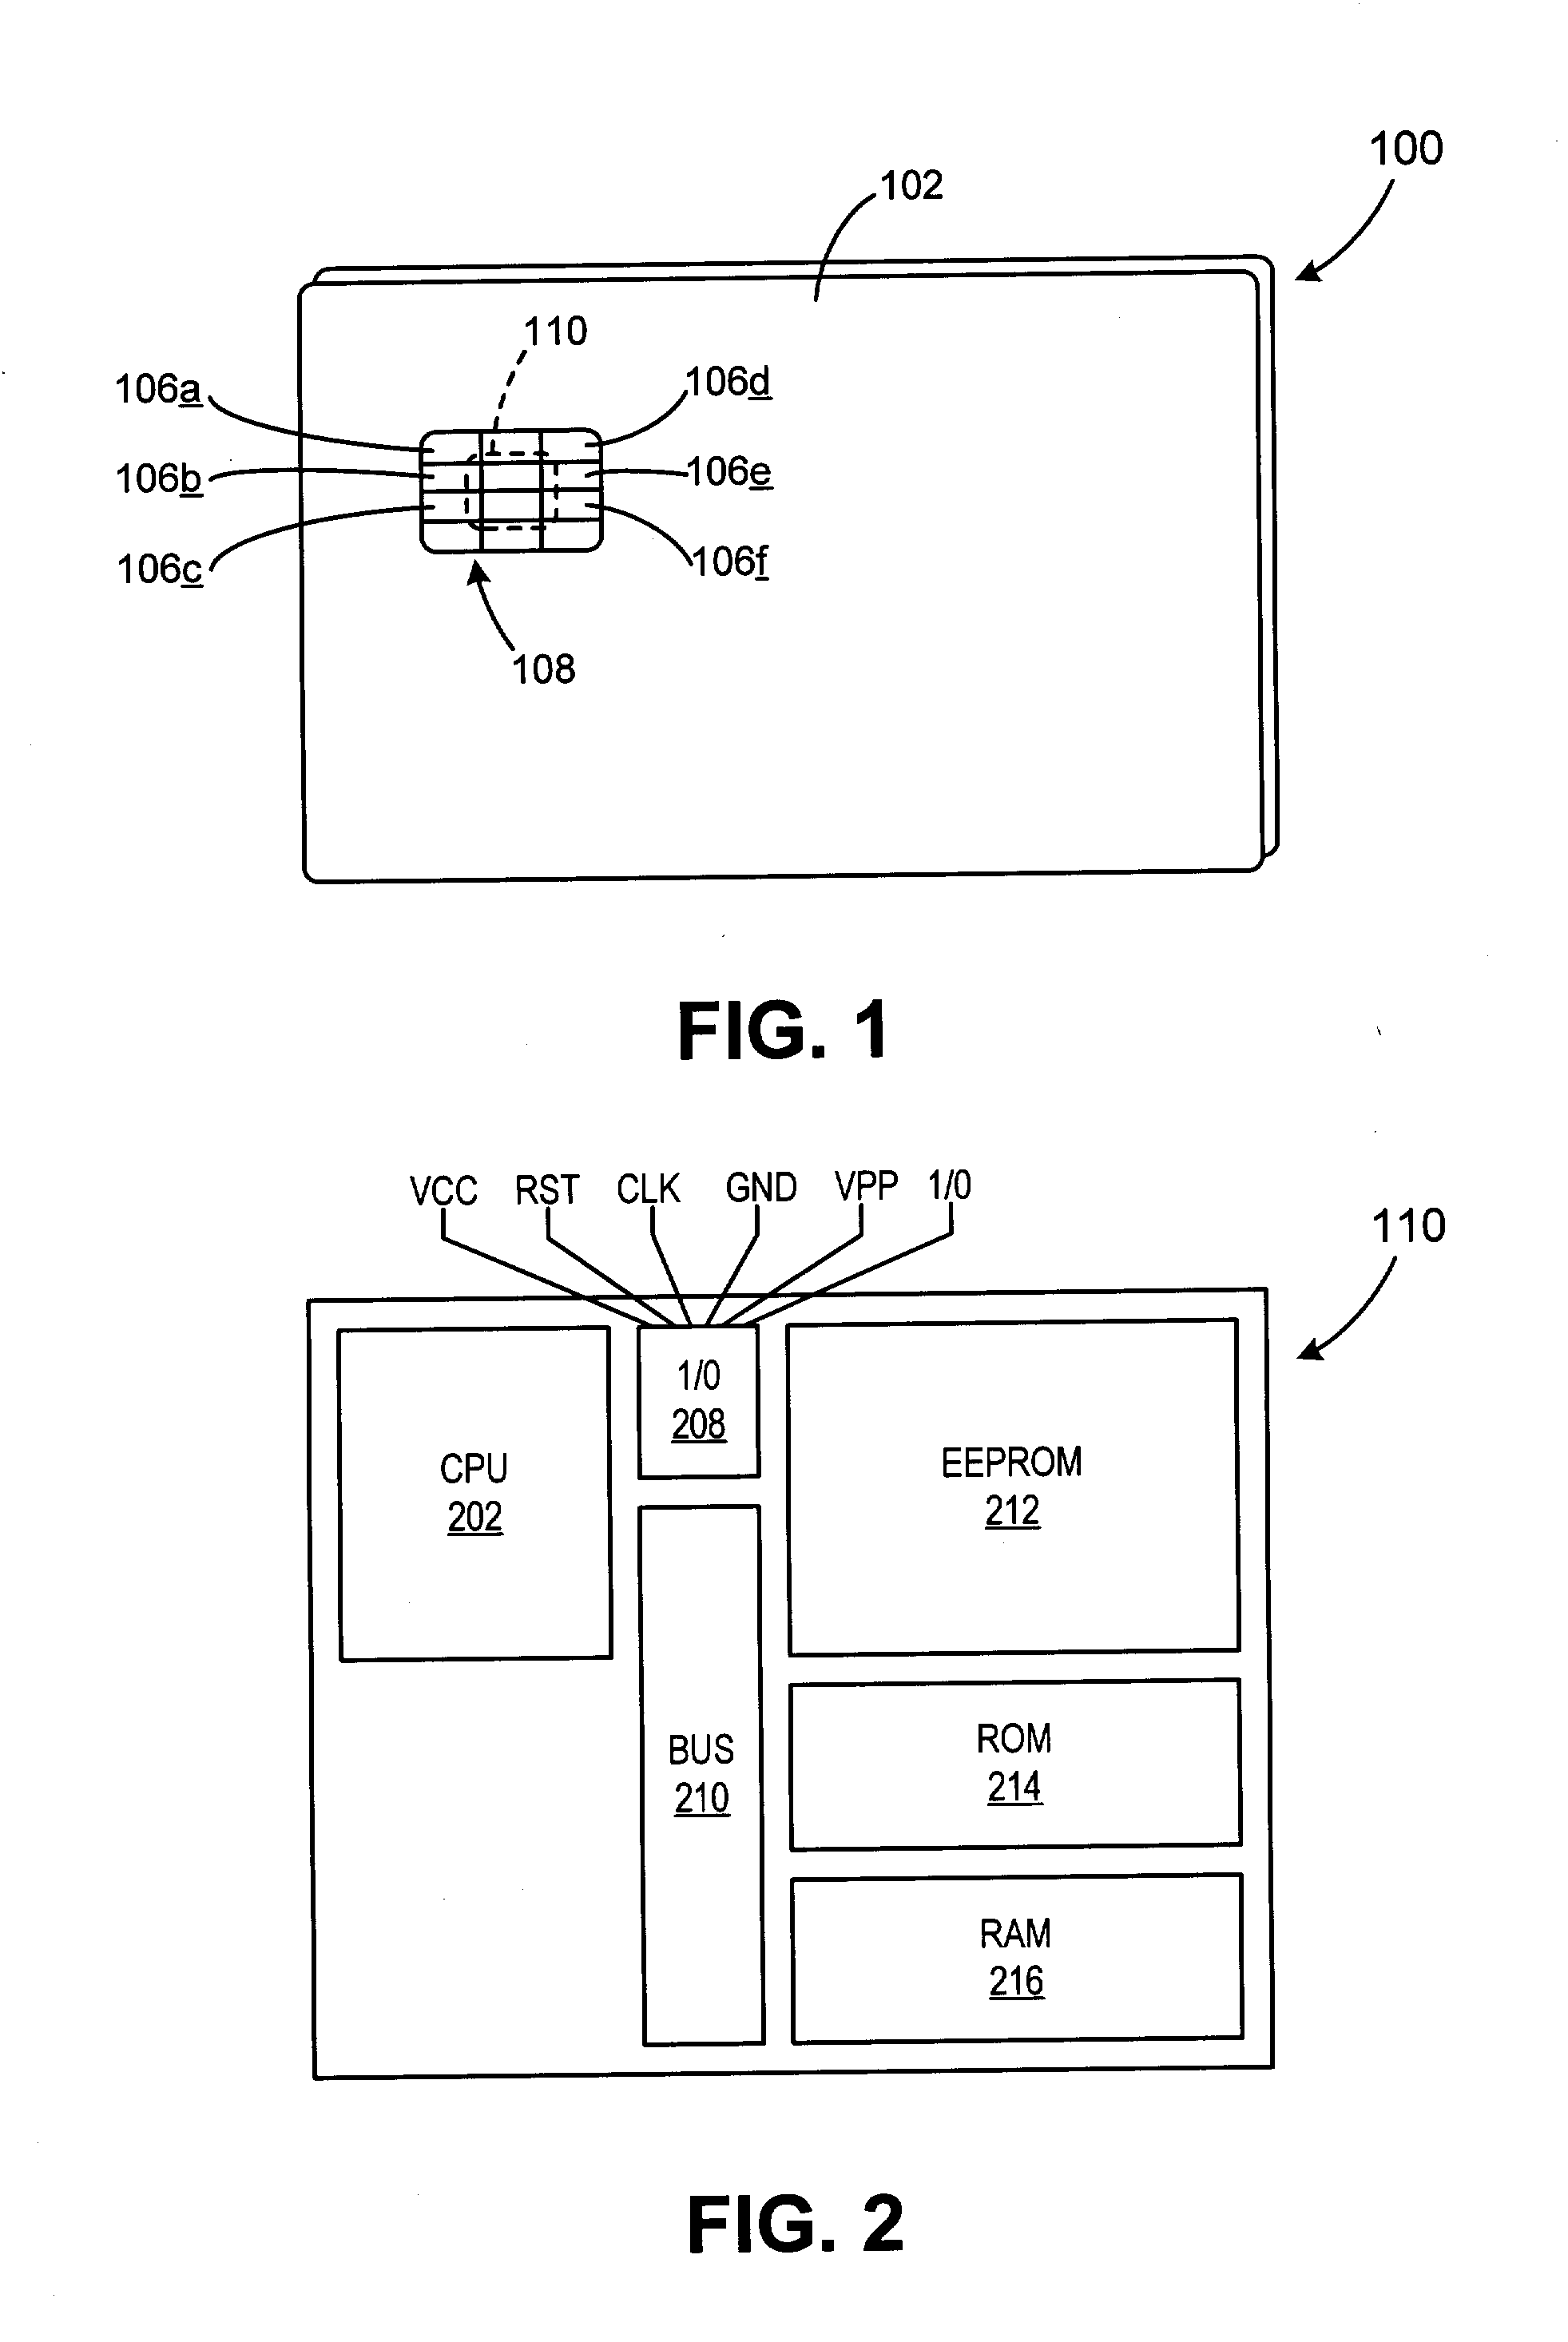 Method and system for voice recognition biometrics on a smartcard